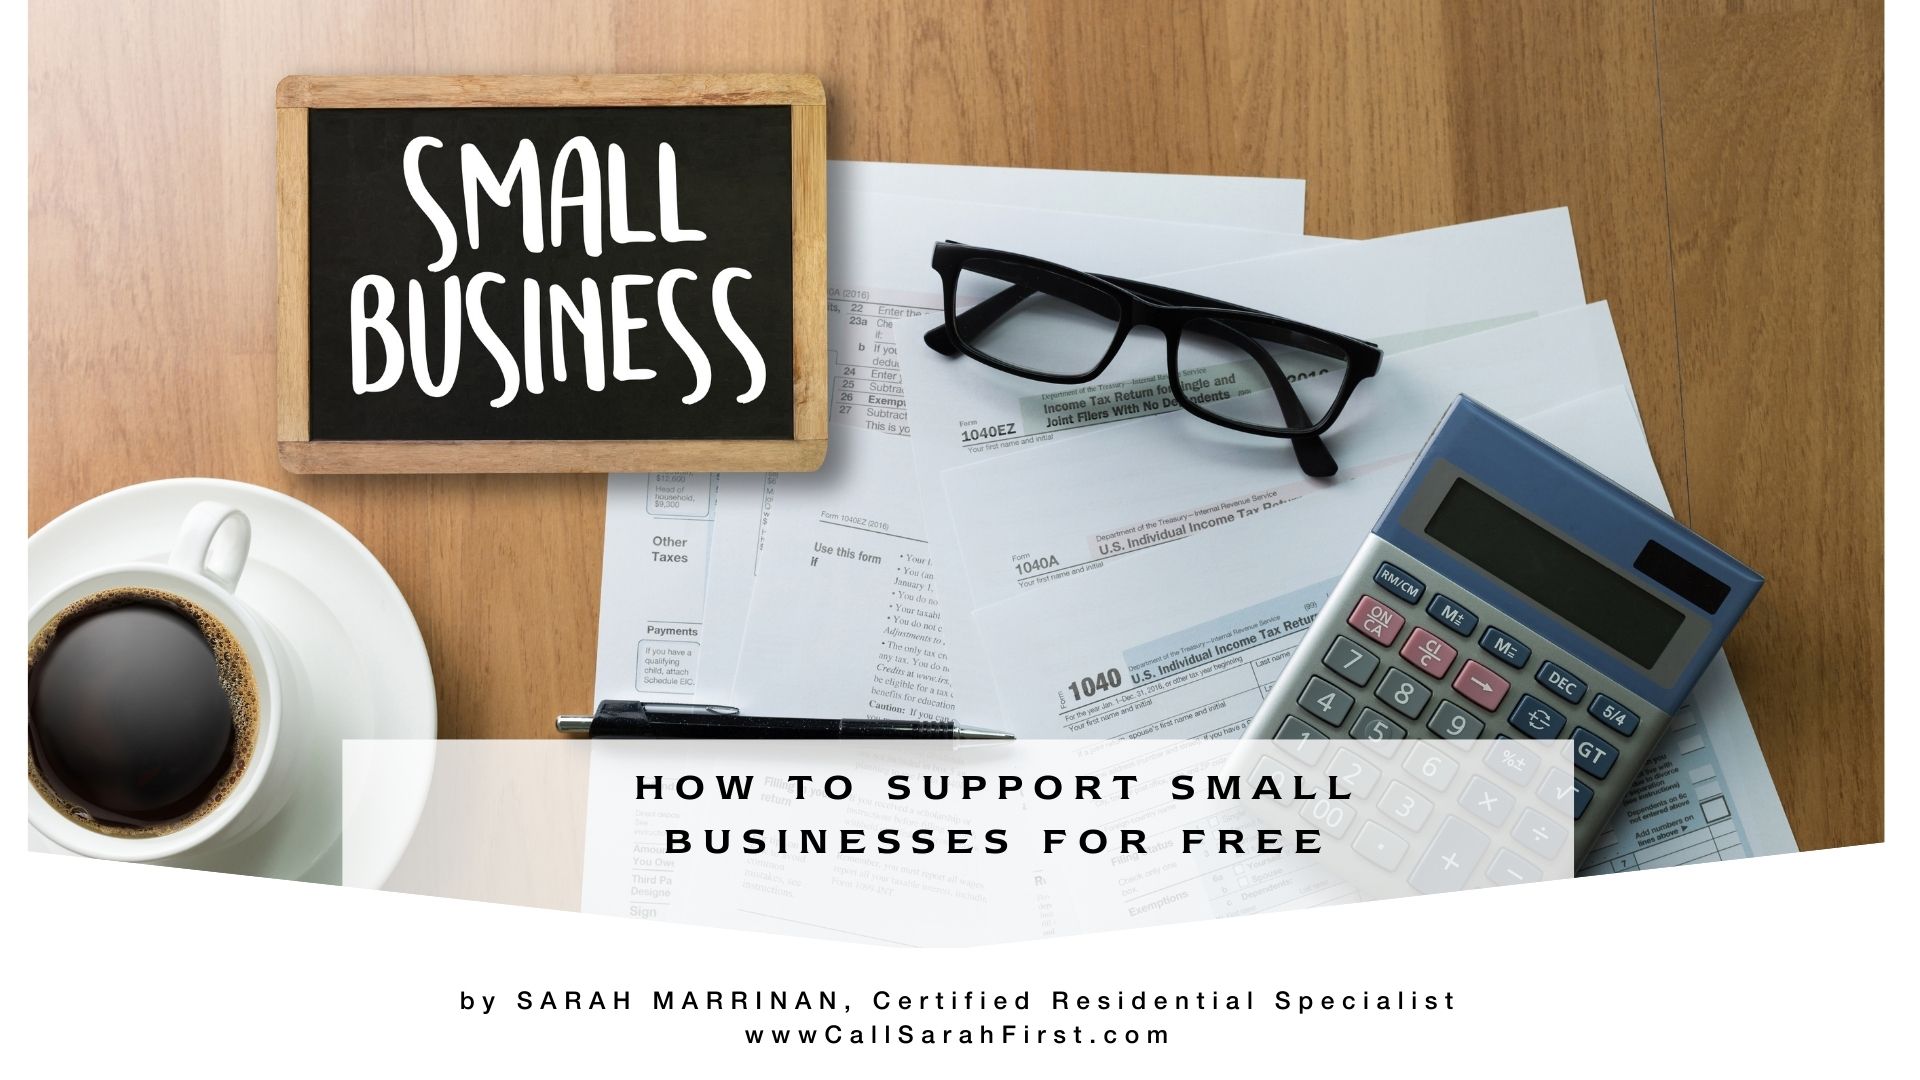 HOW TO SUPPORT SMALL BUSINESSES